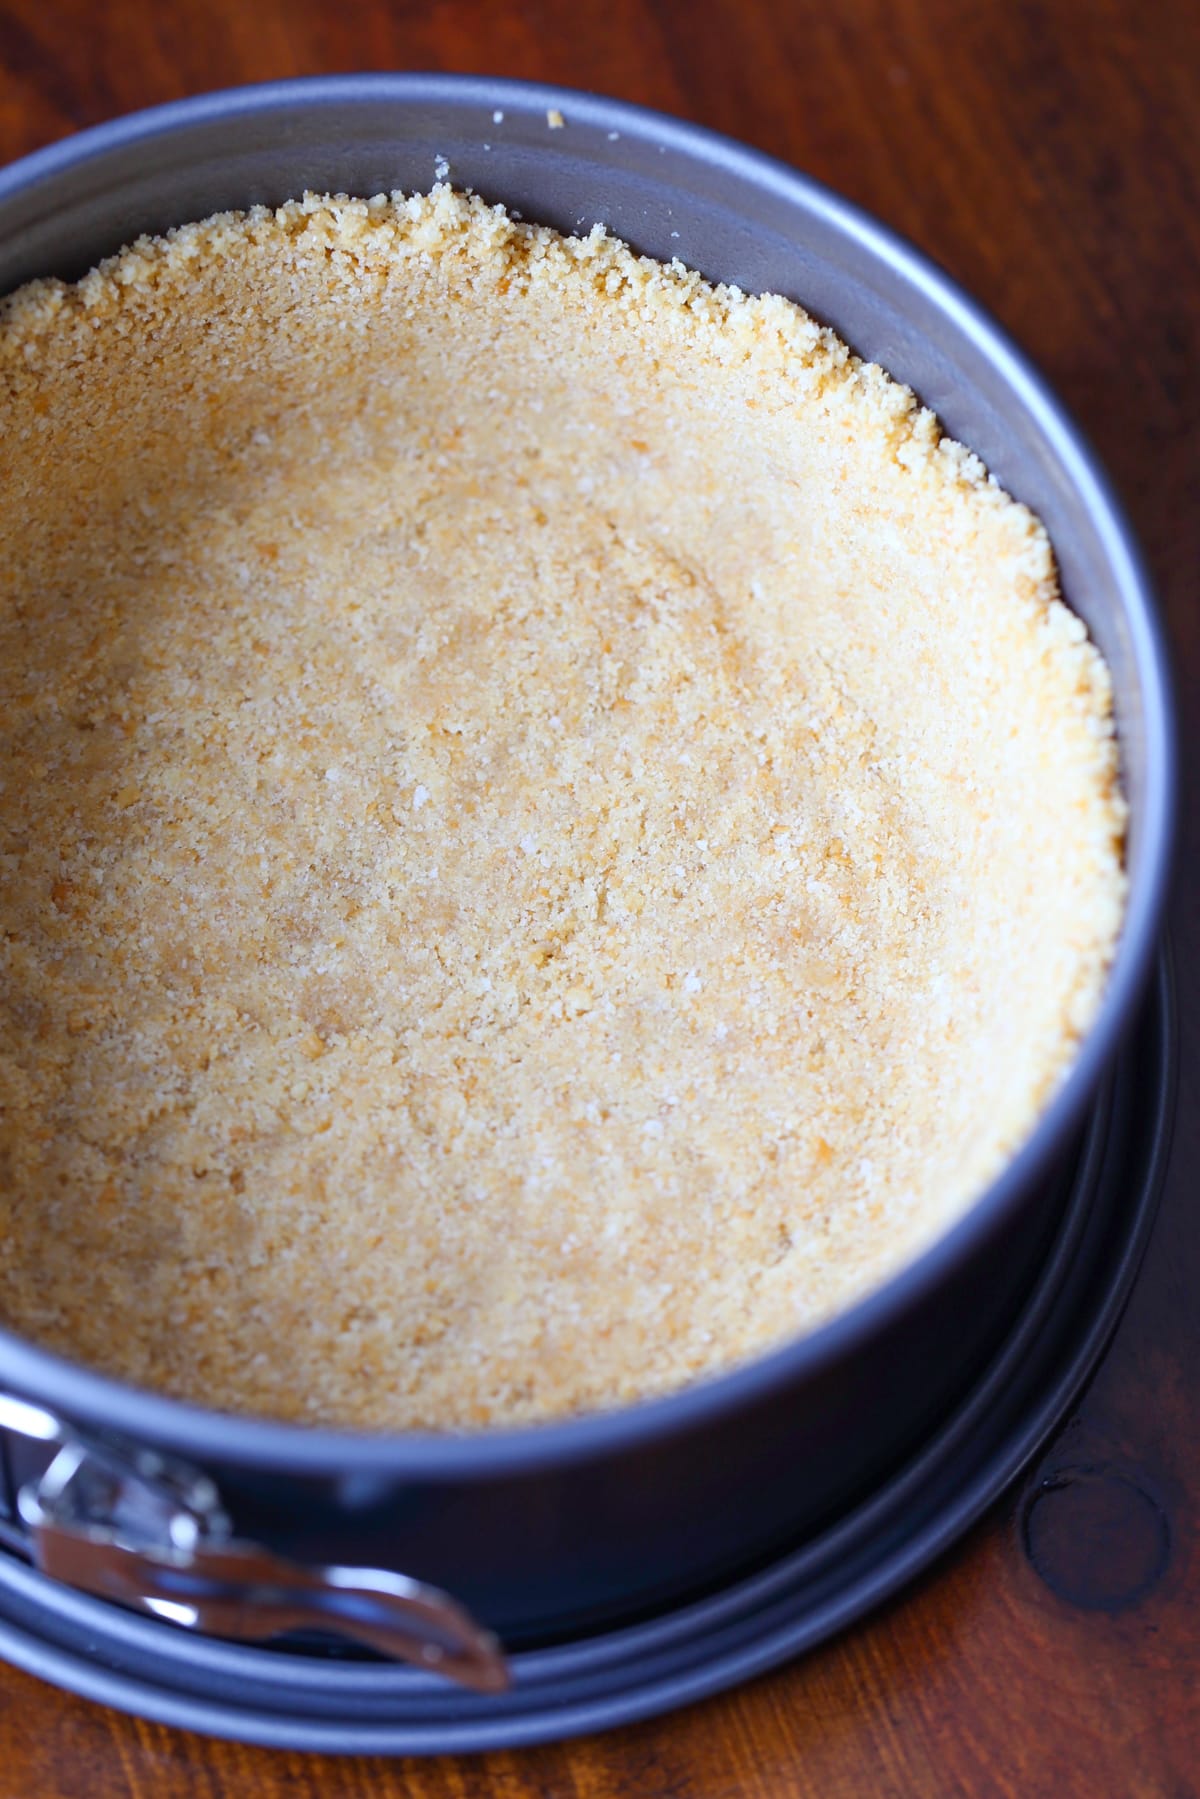 Ritz cracker crust pressed into the bottom of a springform pan.